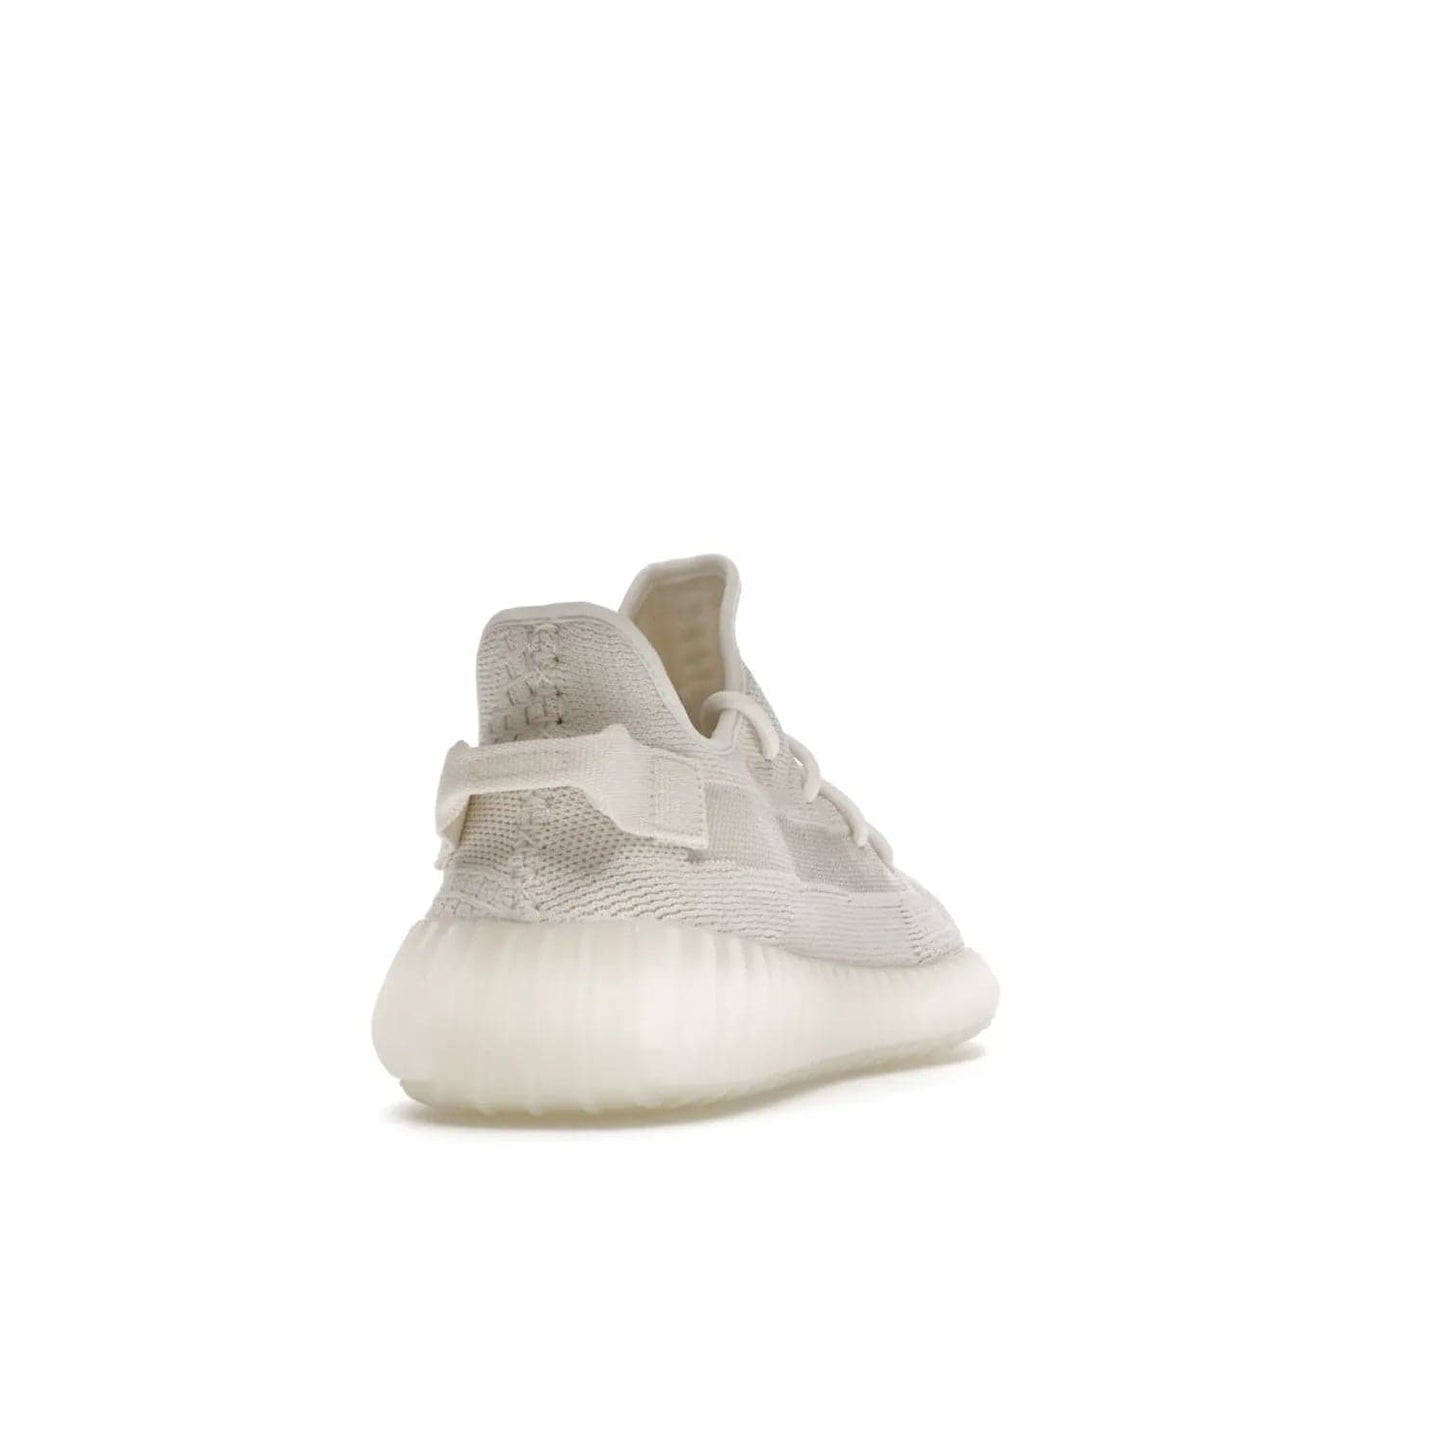 adidas Yeezy Boost 350 V2 Bone - Image 30 - Only at www.BallersClubKickz.com - Grab the stylish and comfortable adidas Yeezy Boost 350 V2 Bone in March 2022. This sneaker features a triple white Primeknit upper, mesh side stripes and canvas heel tabs, sitting atop a semi-translucent sole with Boost technology. Sure to keep your feet comfortable and stylish!